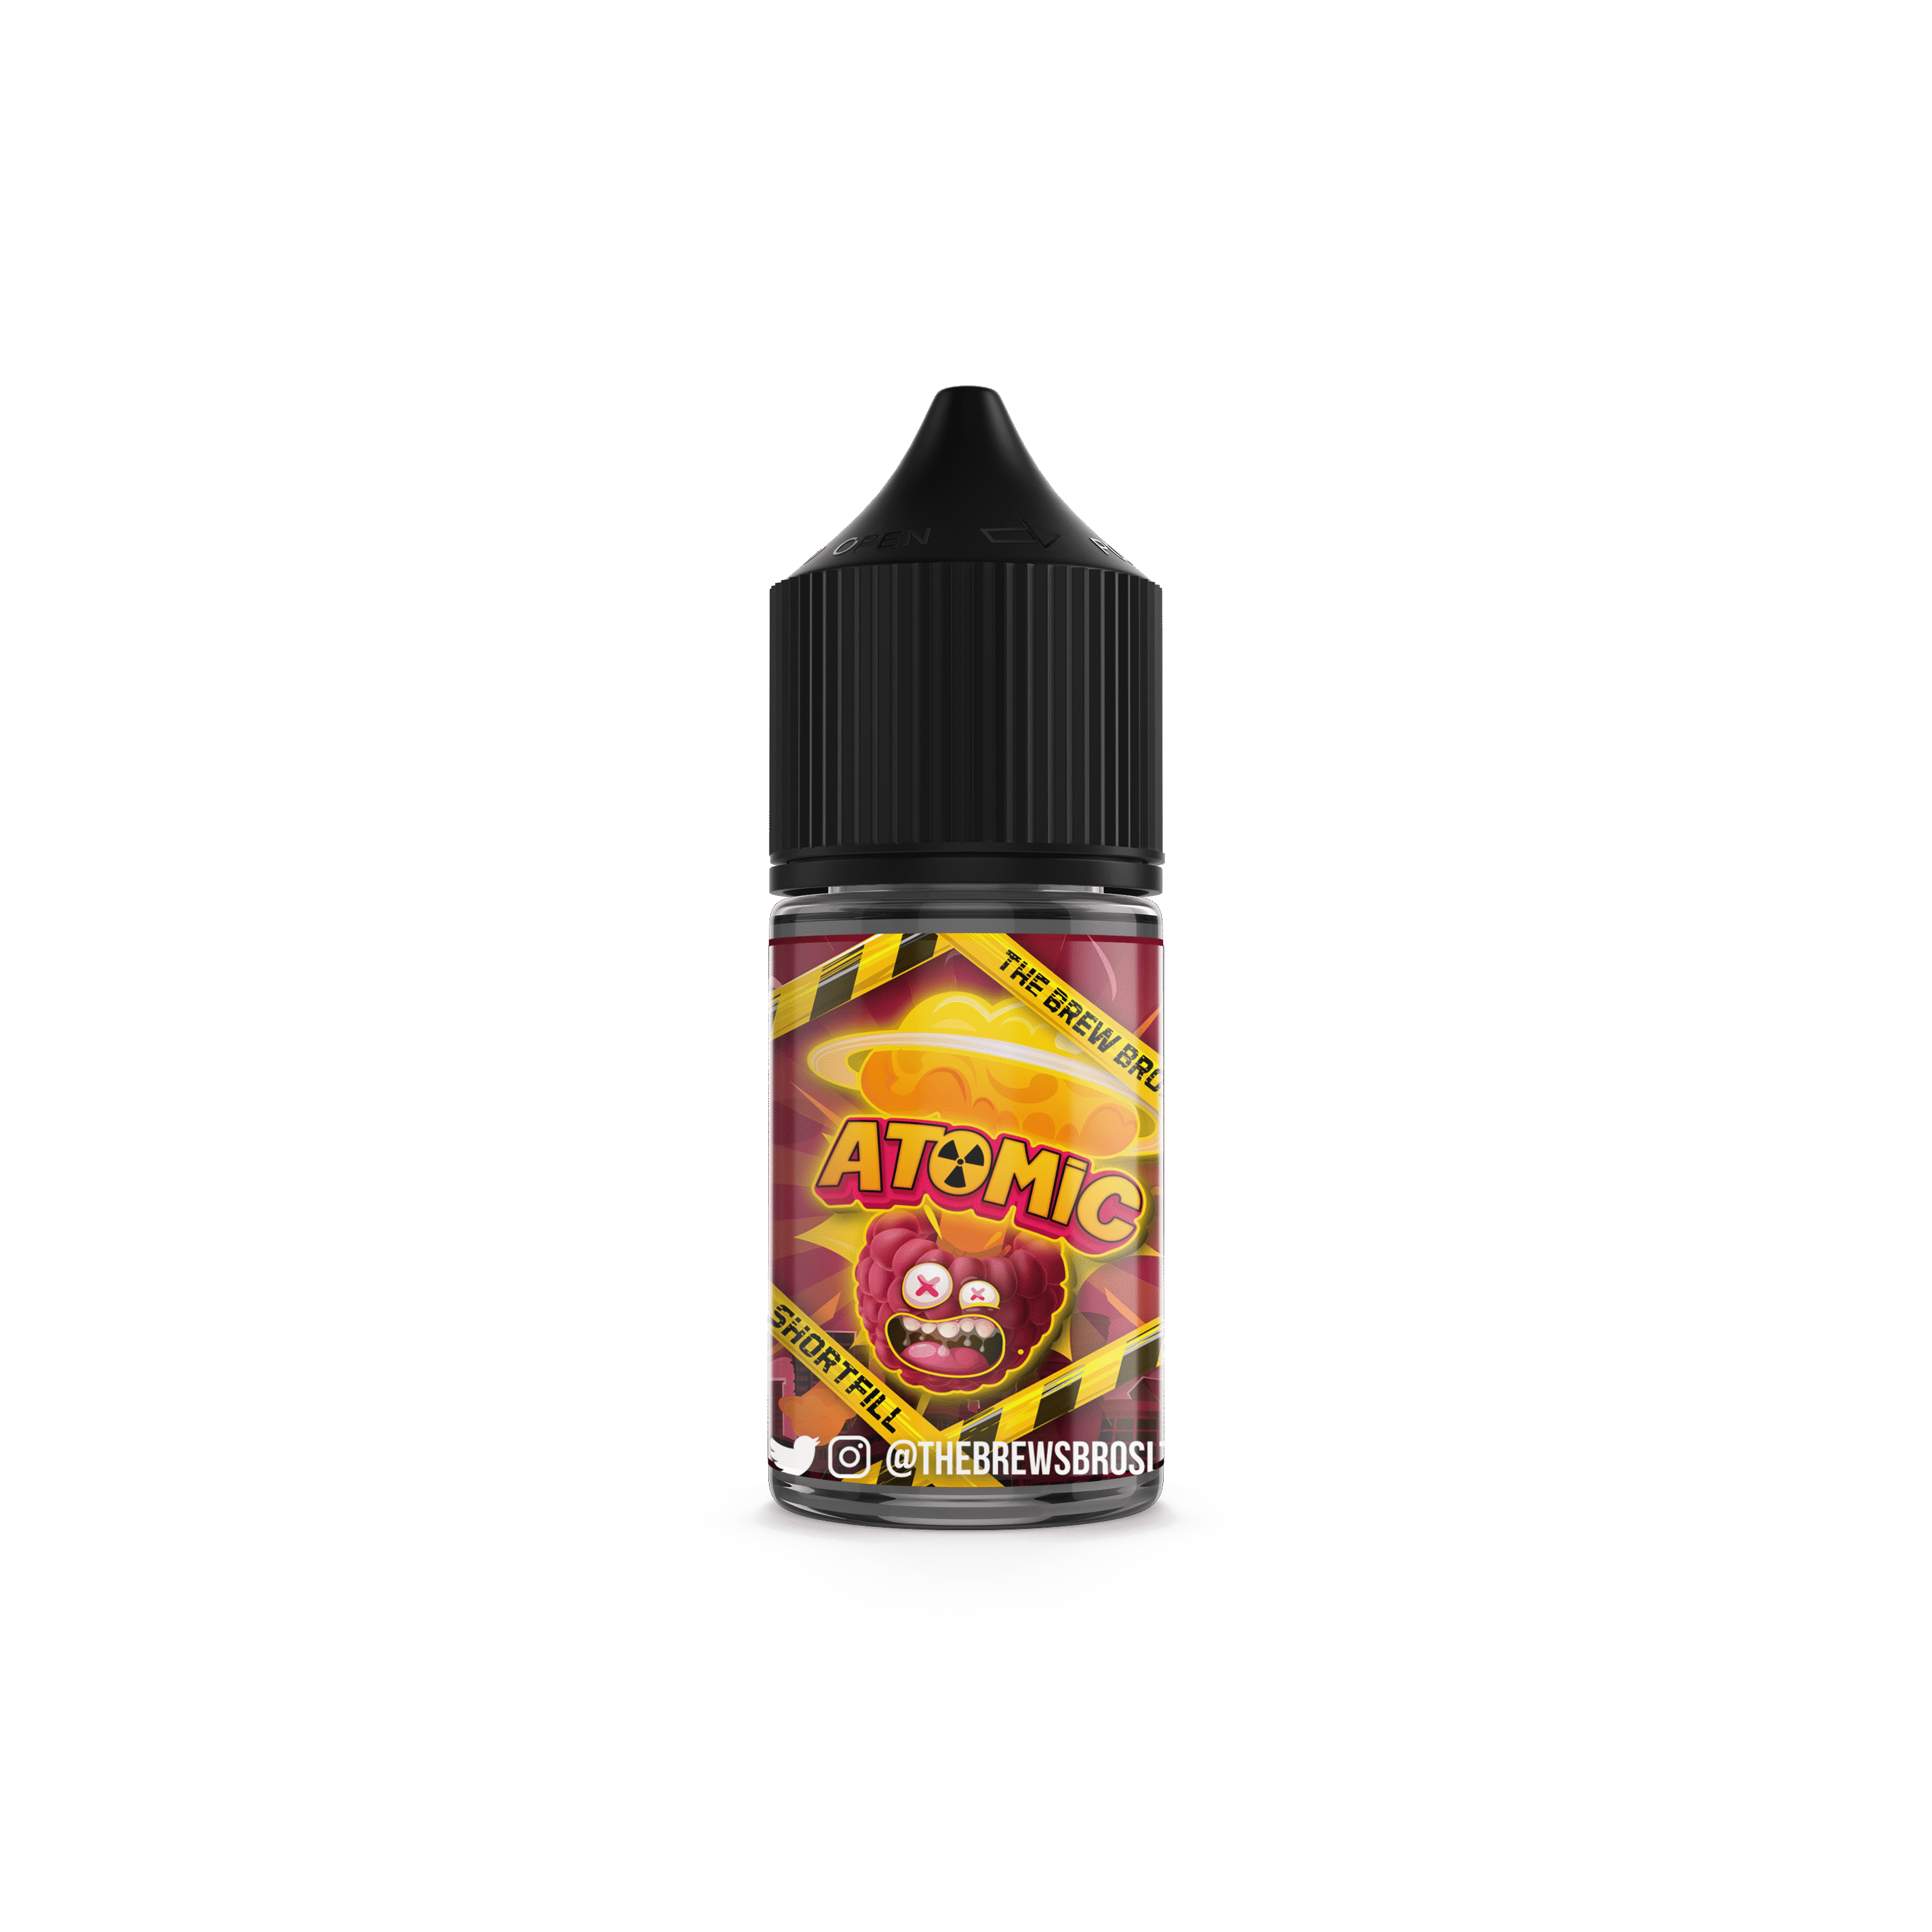 Atomic Flavour Concentrate by Brews Bros